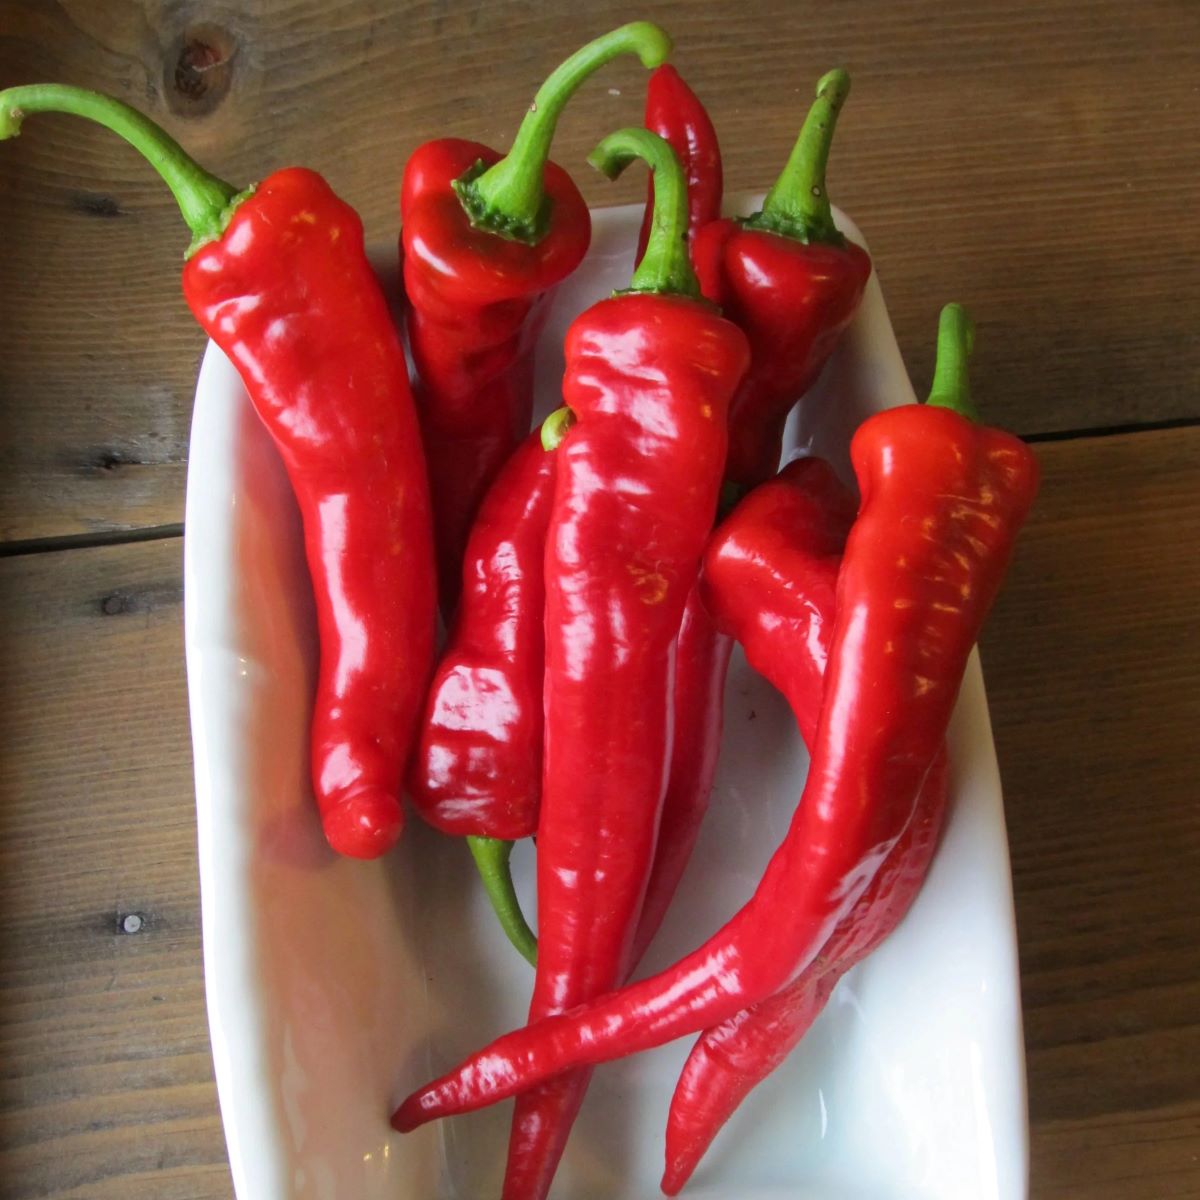 How To Store Hot Peppers In The Fridge